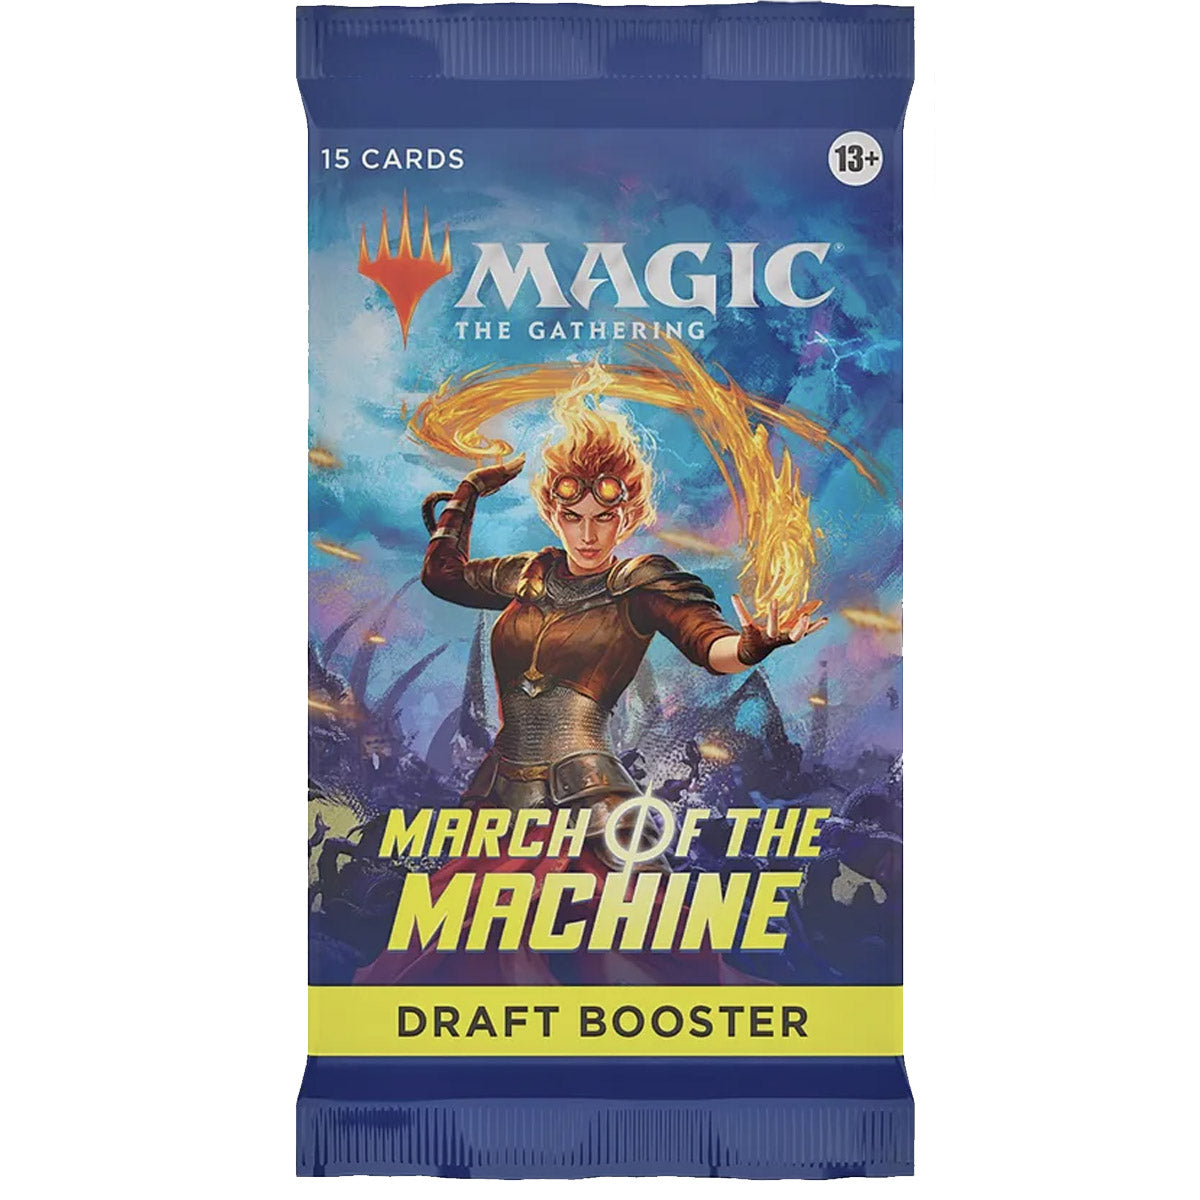 Magic The Gathering: March of the Machine Draft Booster Pack